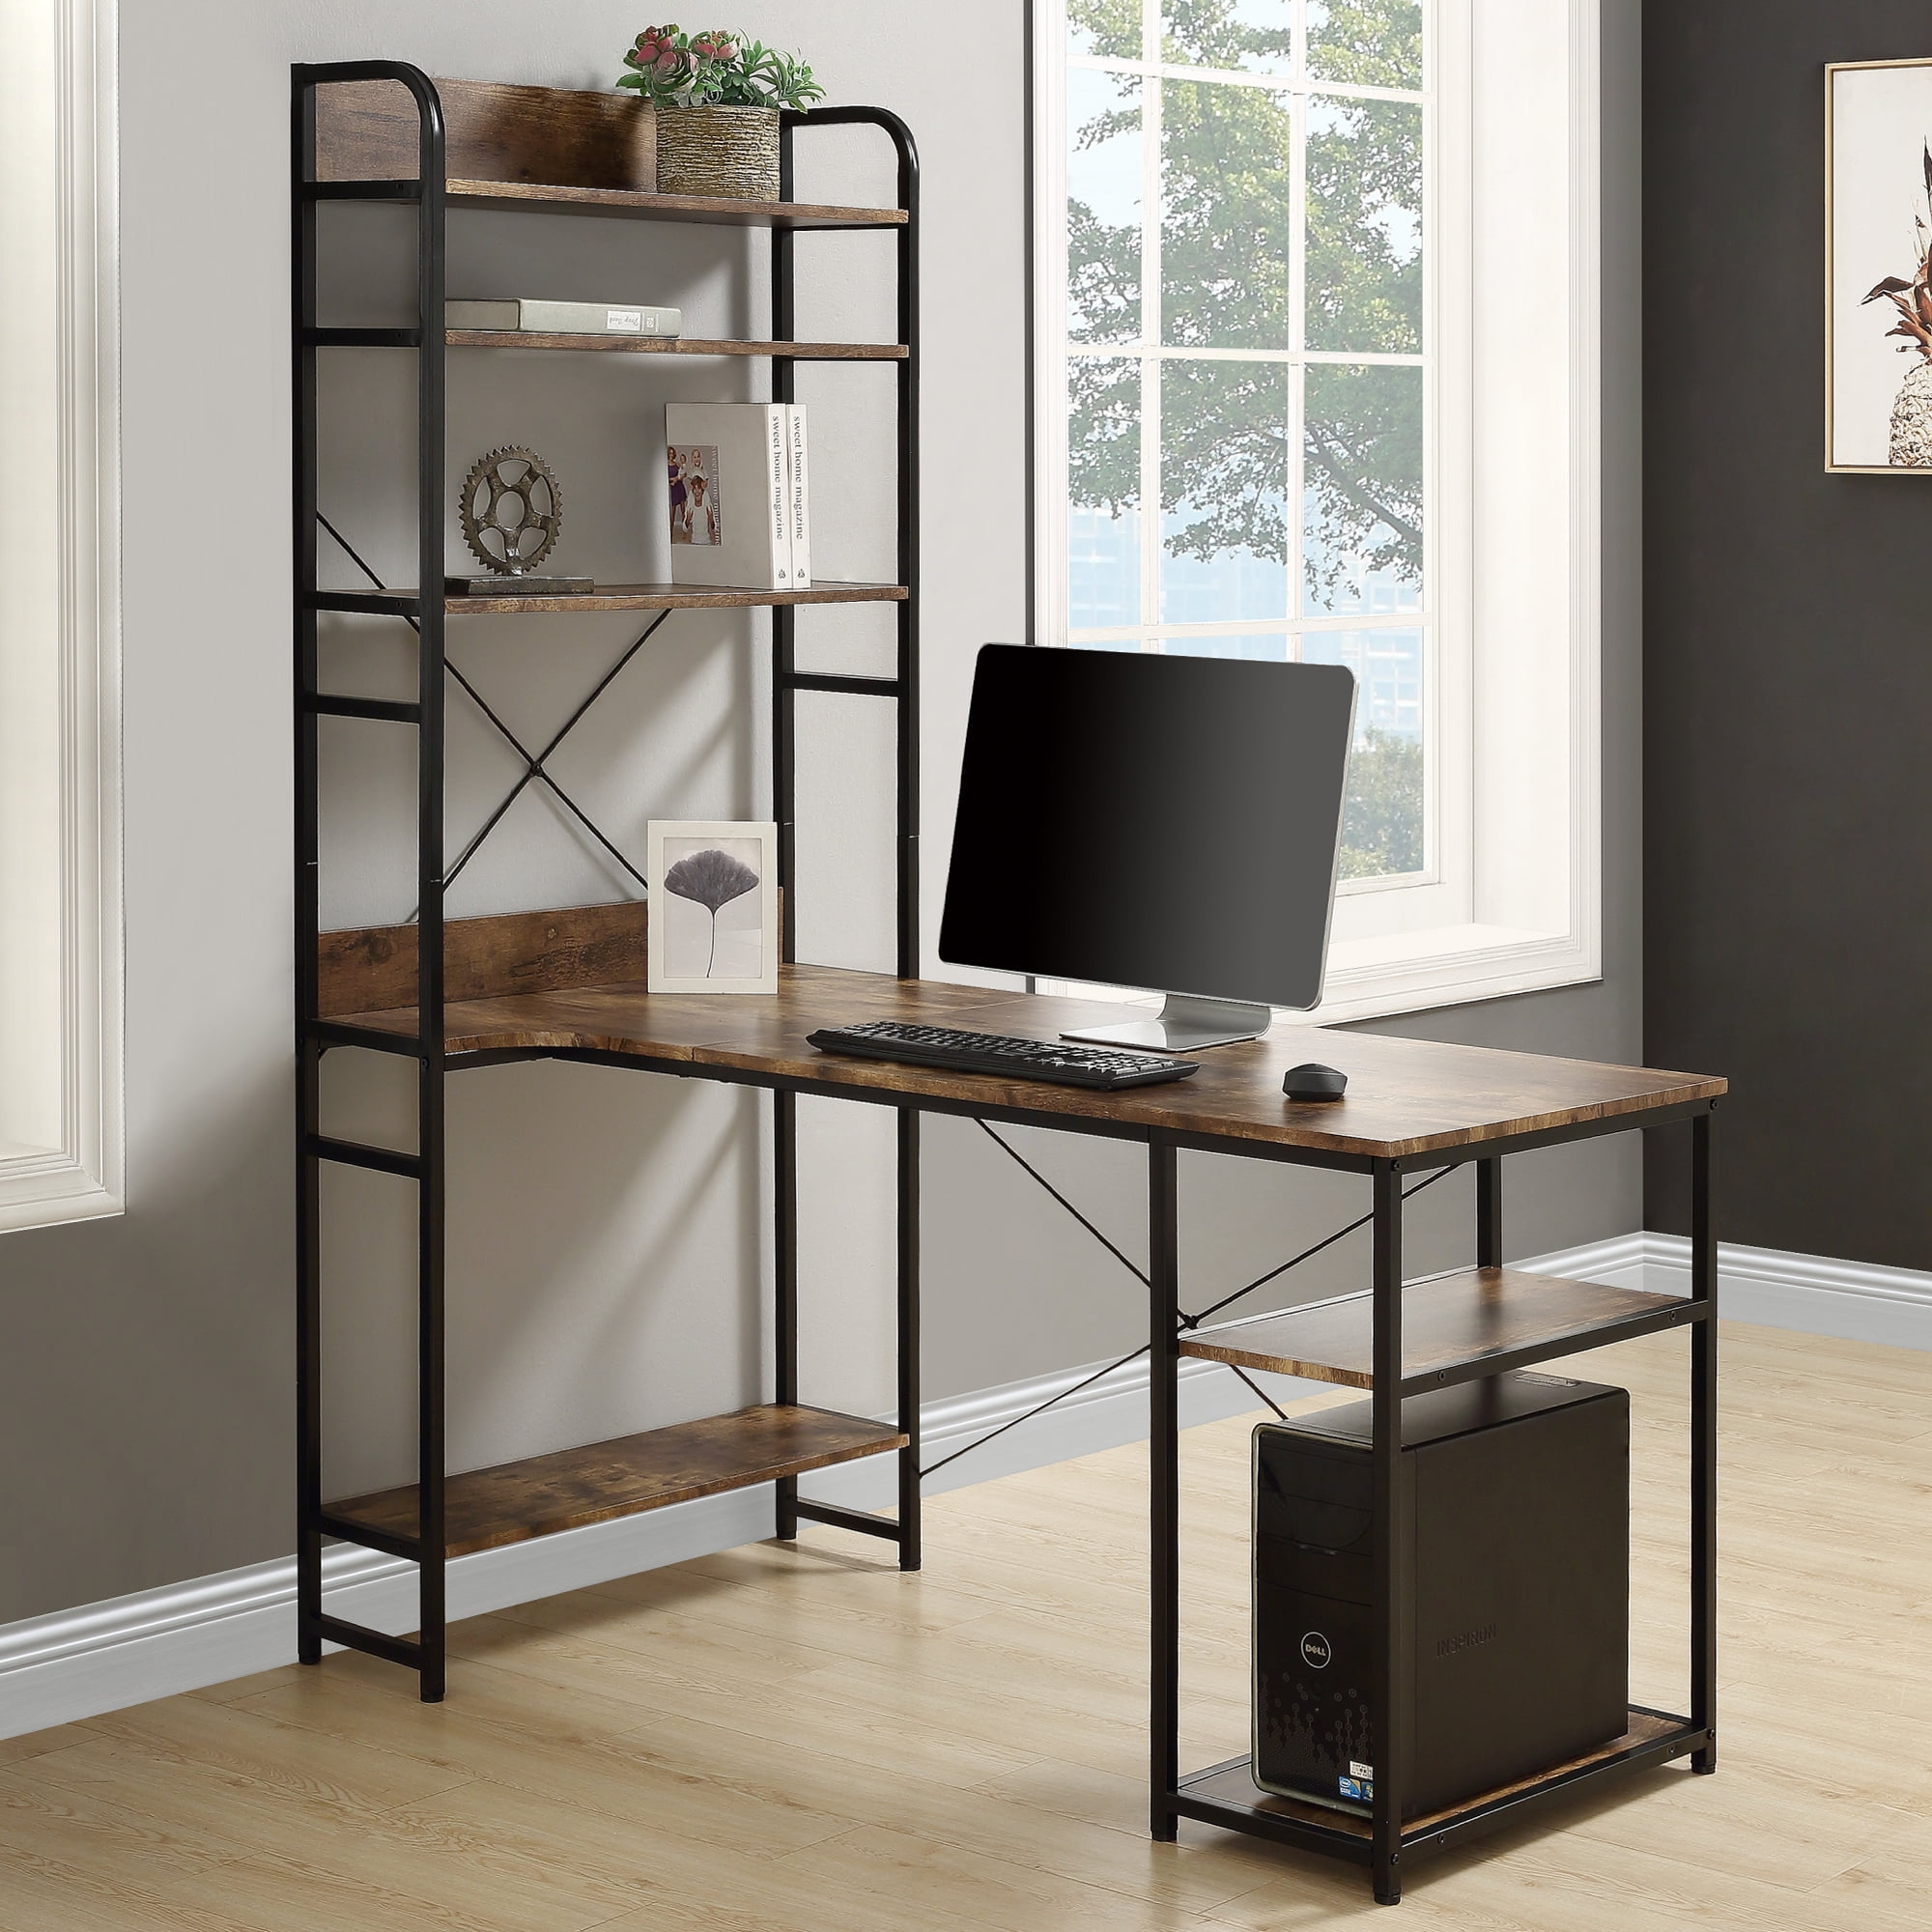 Student Desk With Hutch For Bedroom Office Dorm Black Small Computer Table New 